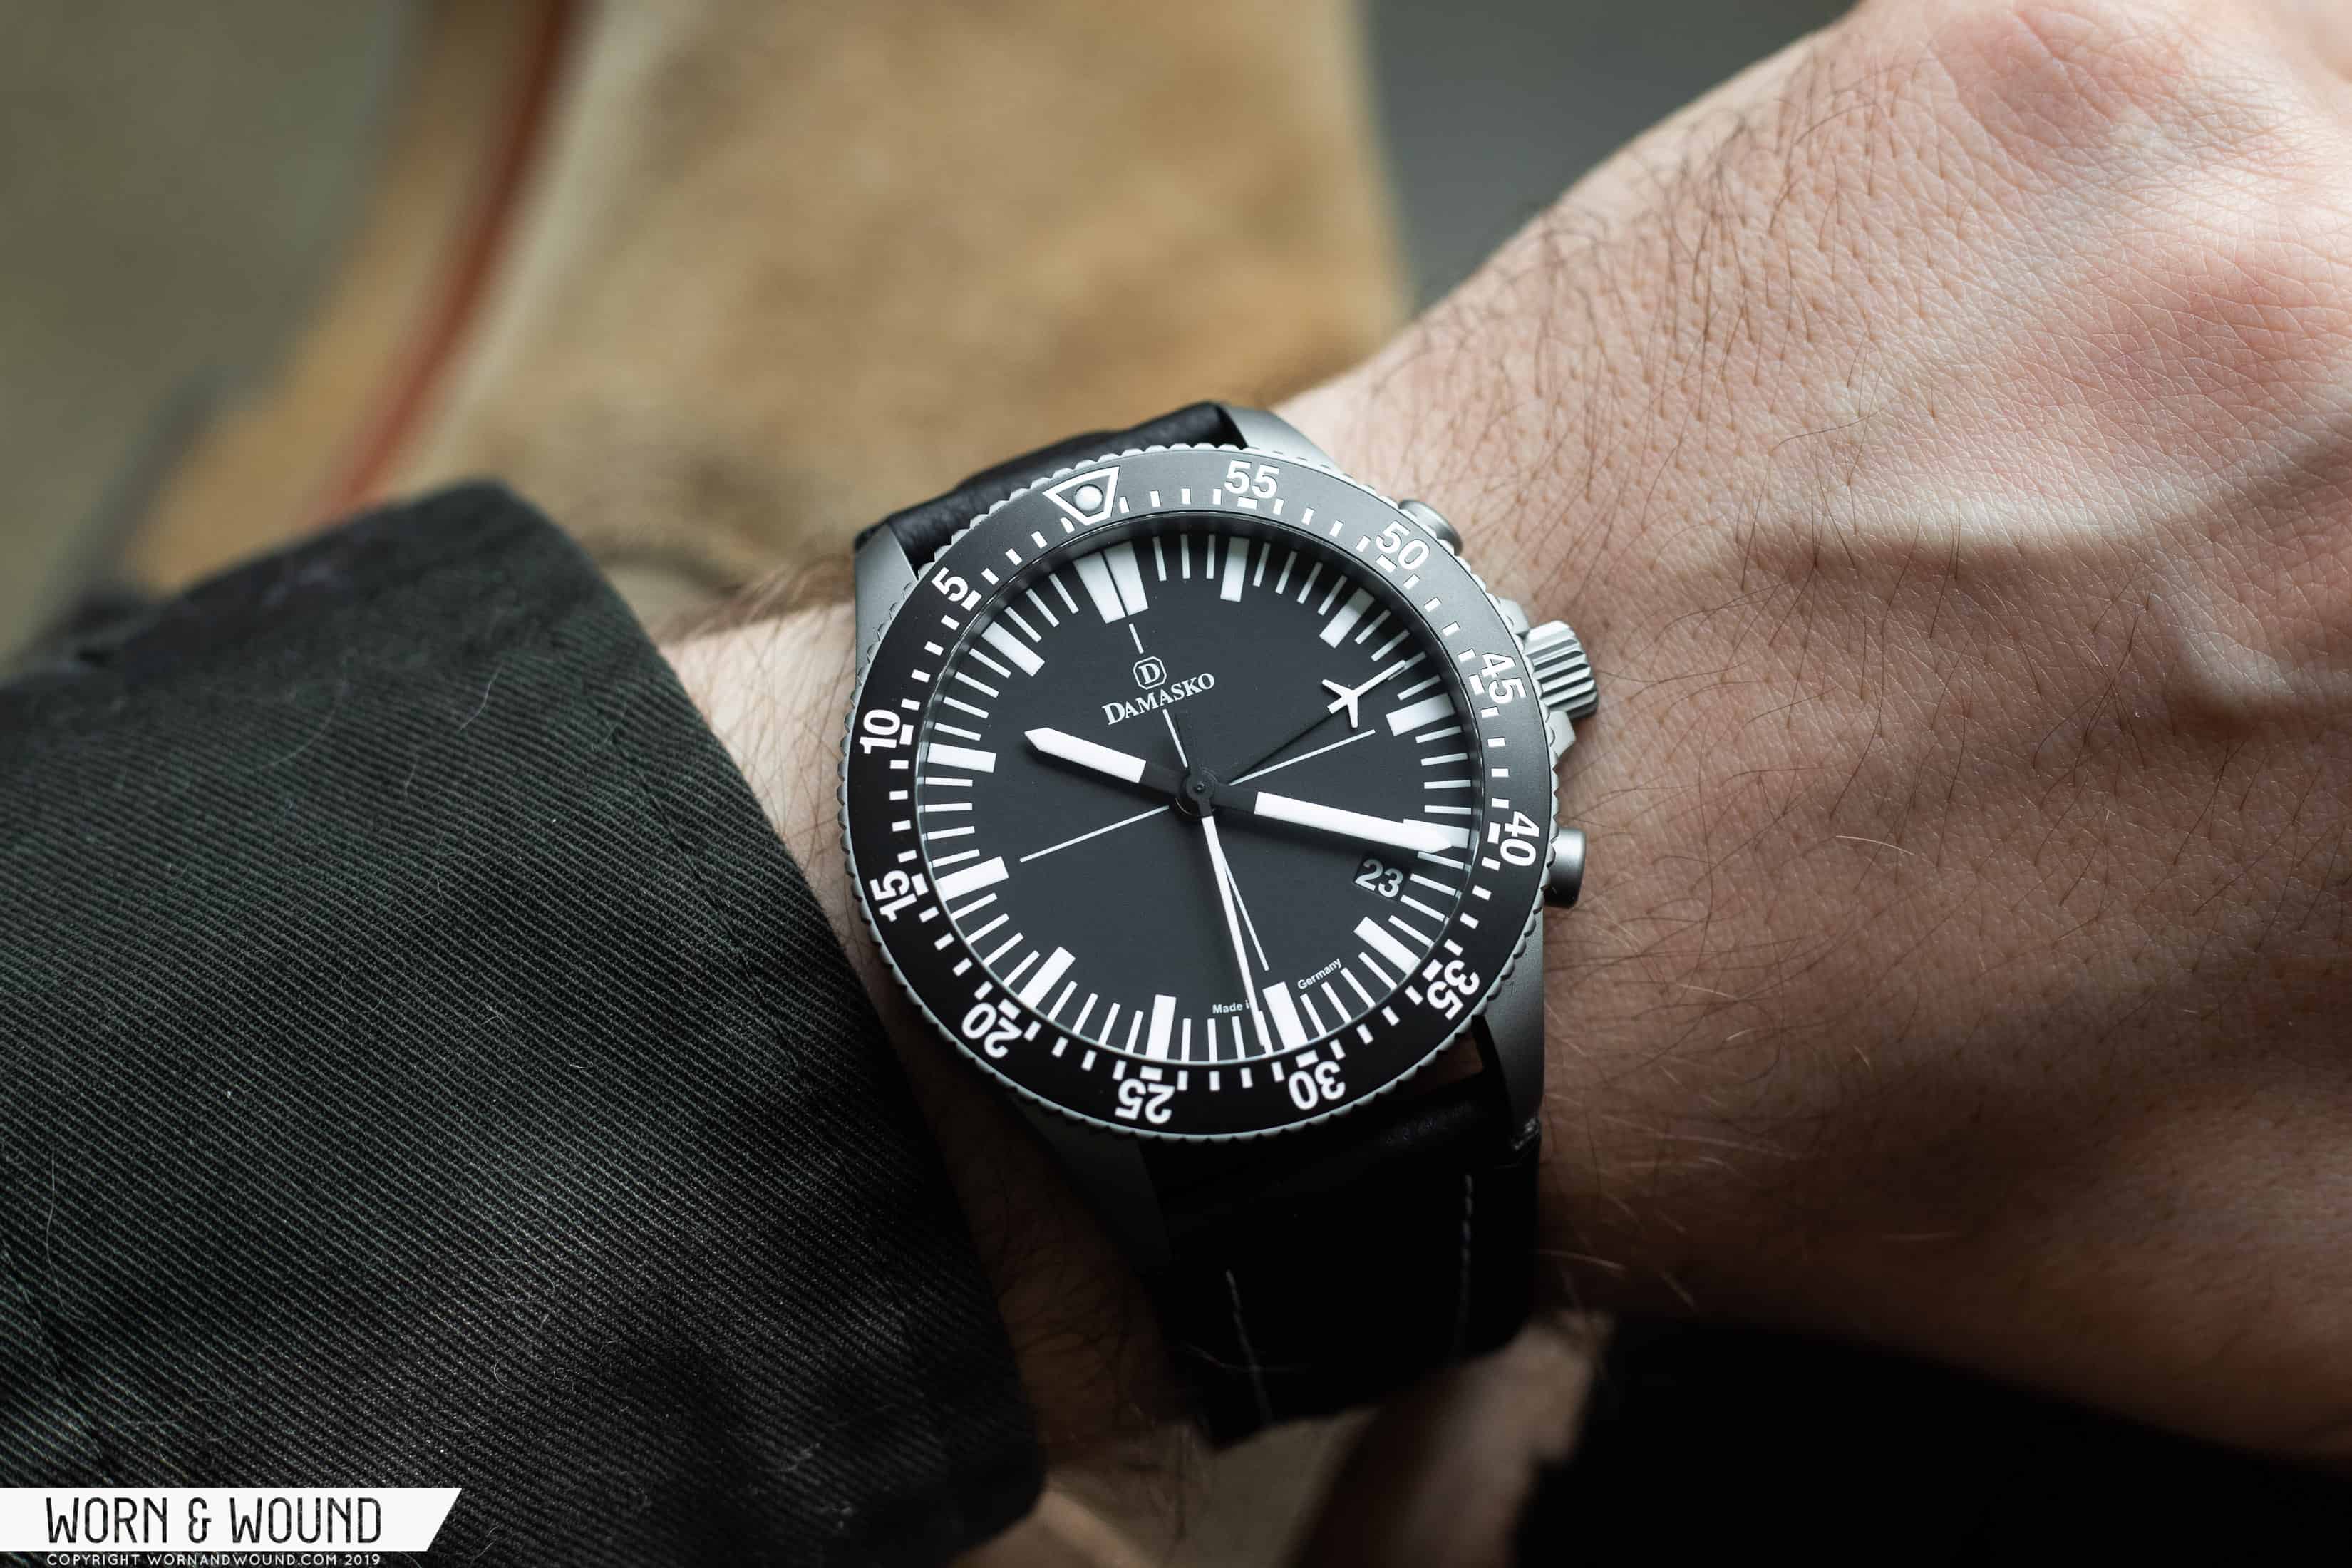 First Look at the Damasko DC82 Central-Minutes Chronograph With a Date